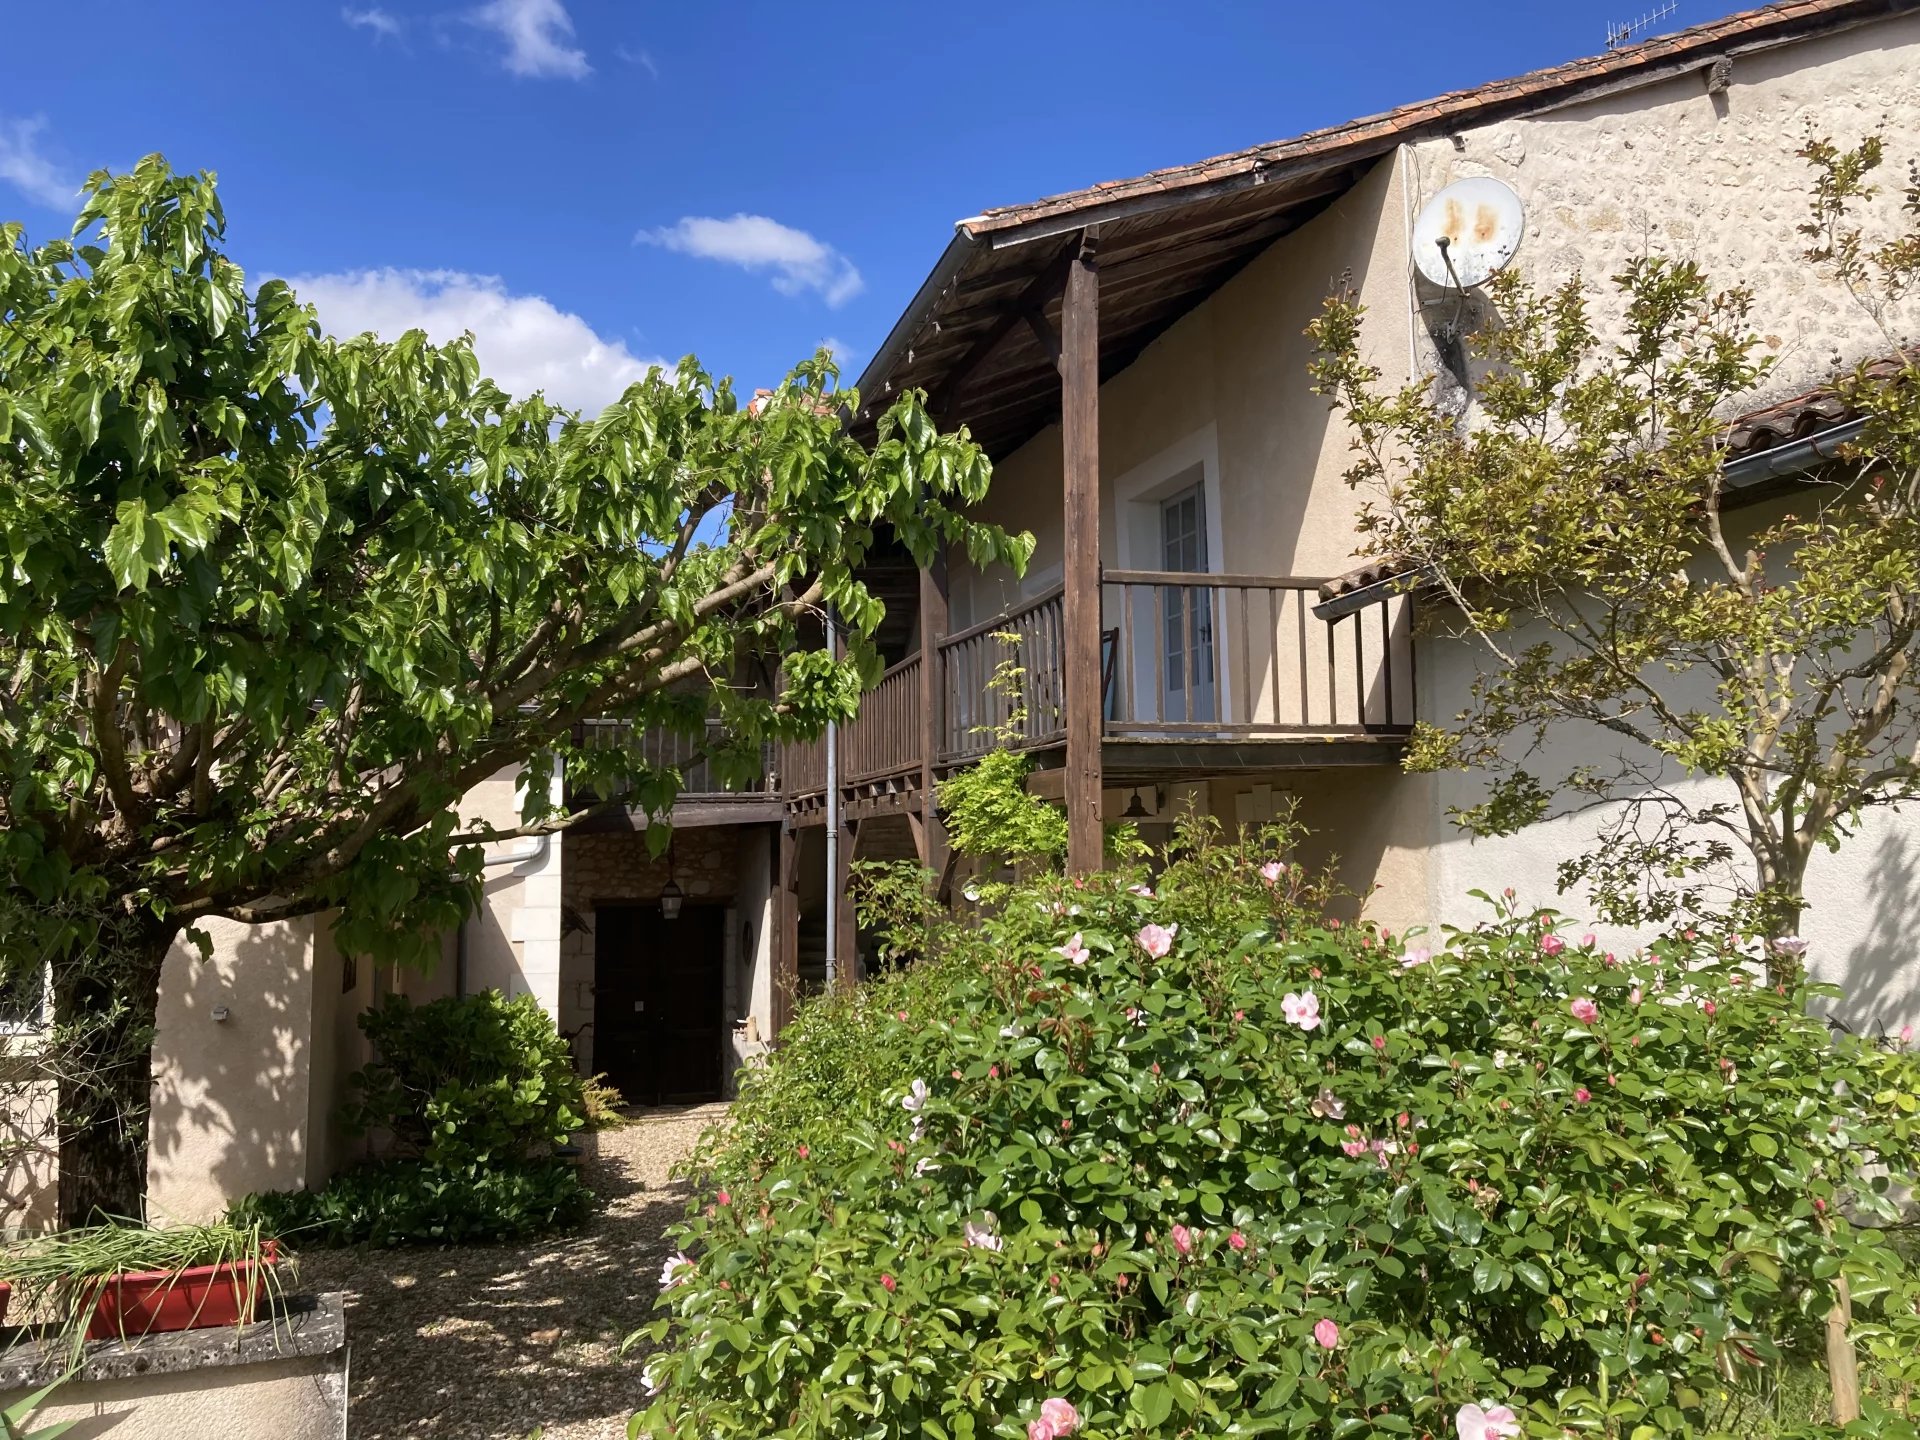 Charming property with garden and balcony in the heart of Aubeterre sur Dronne